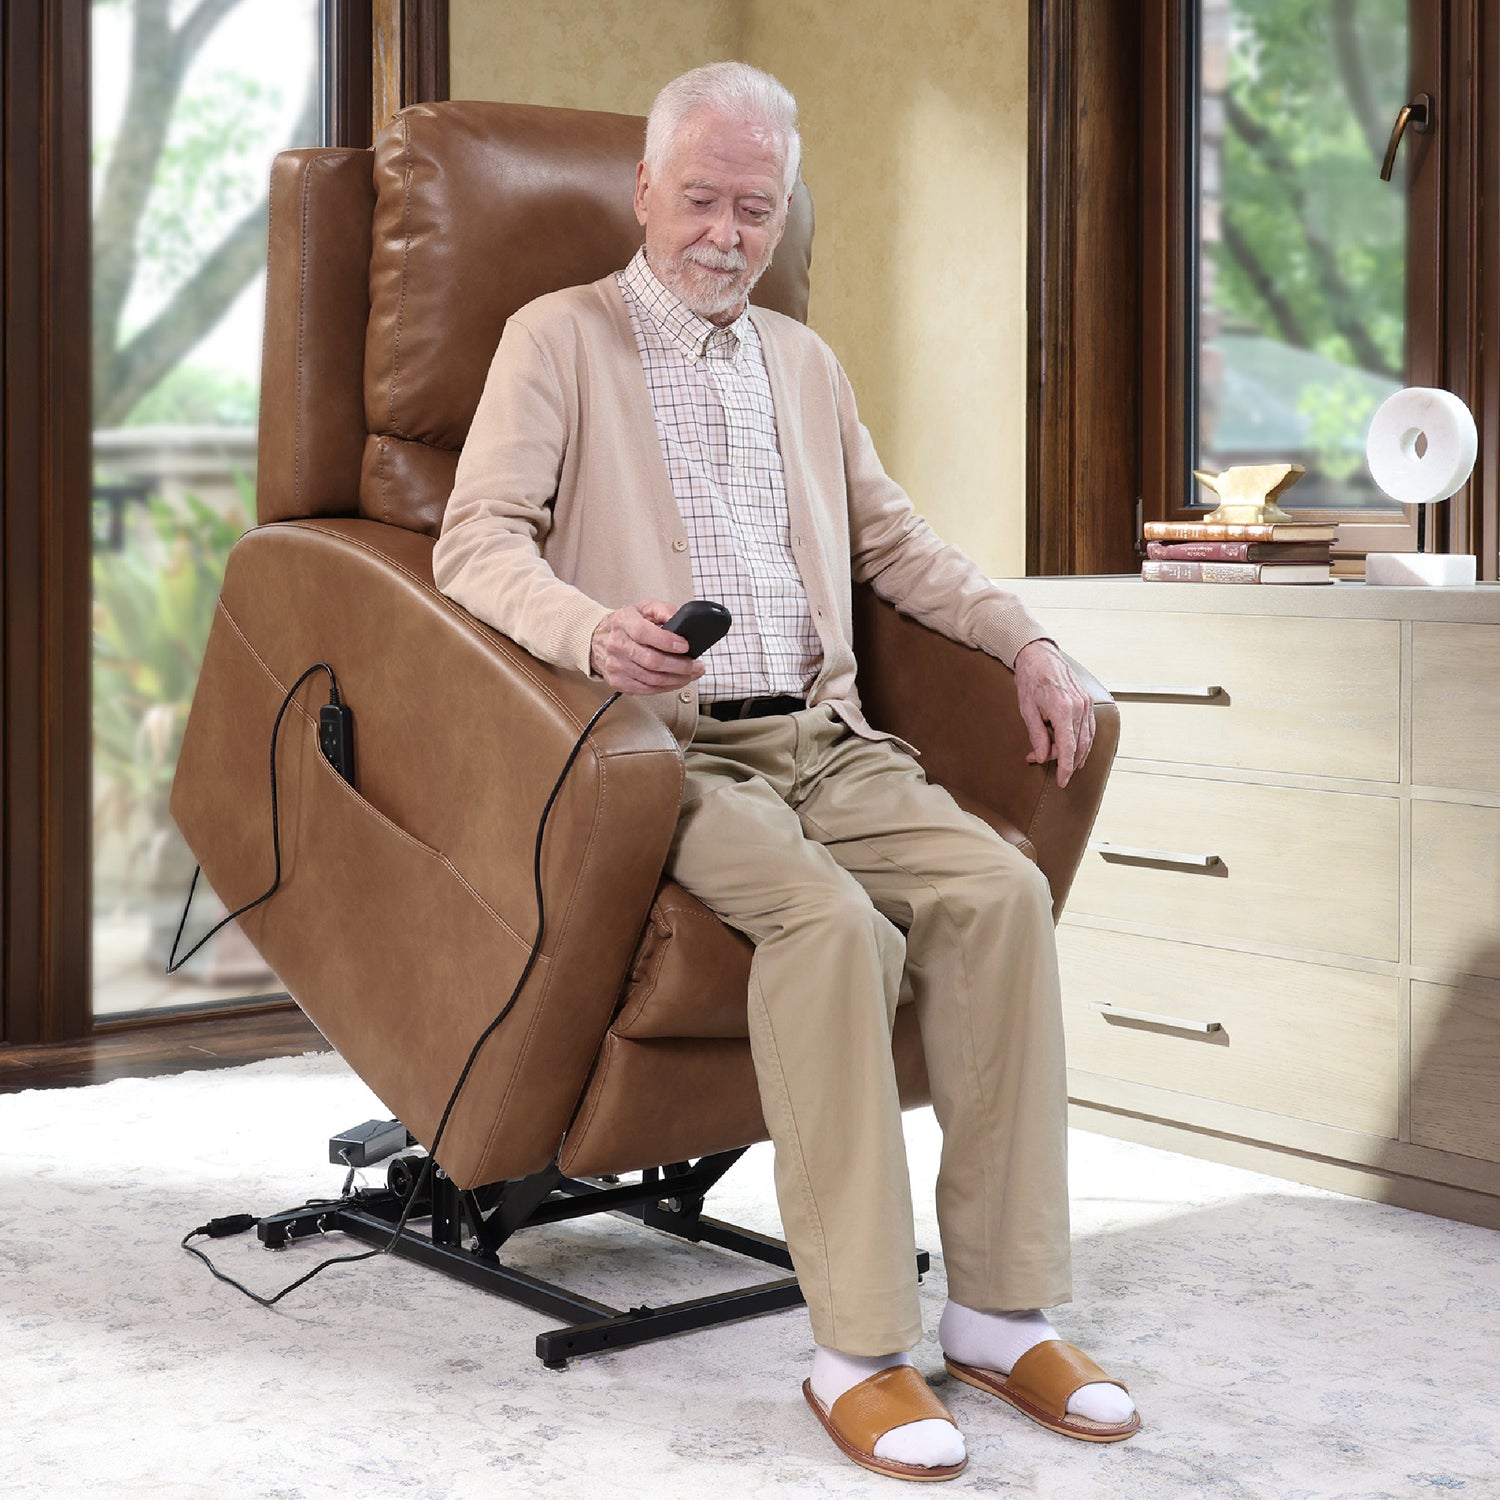 lift chair with heat and massage